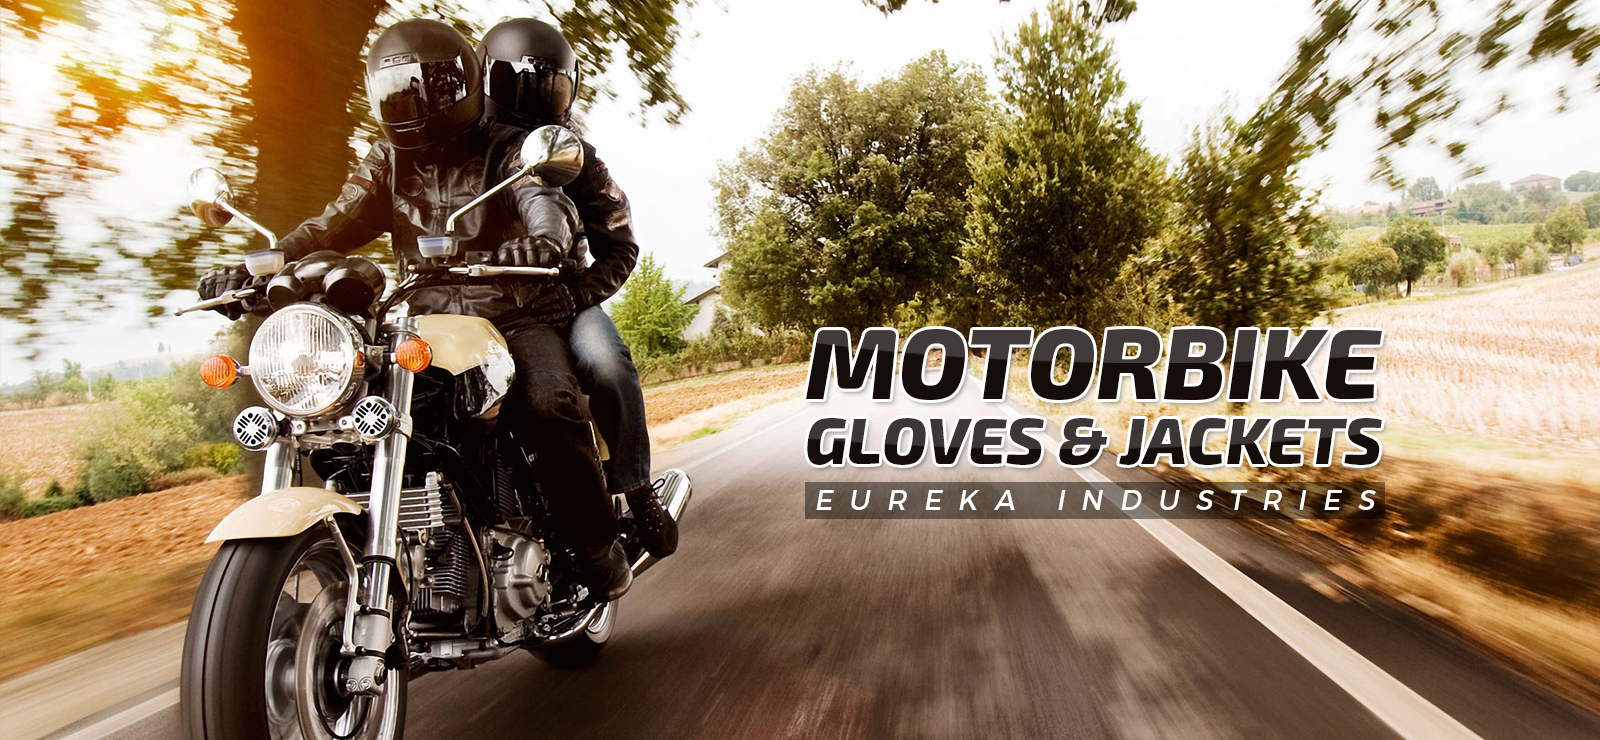 Motorbike Gloves and Jackets-2